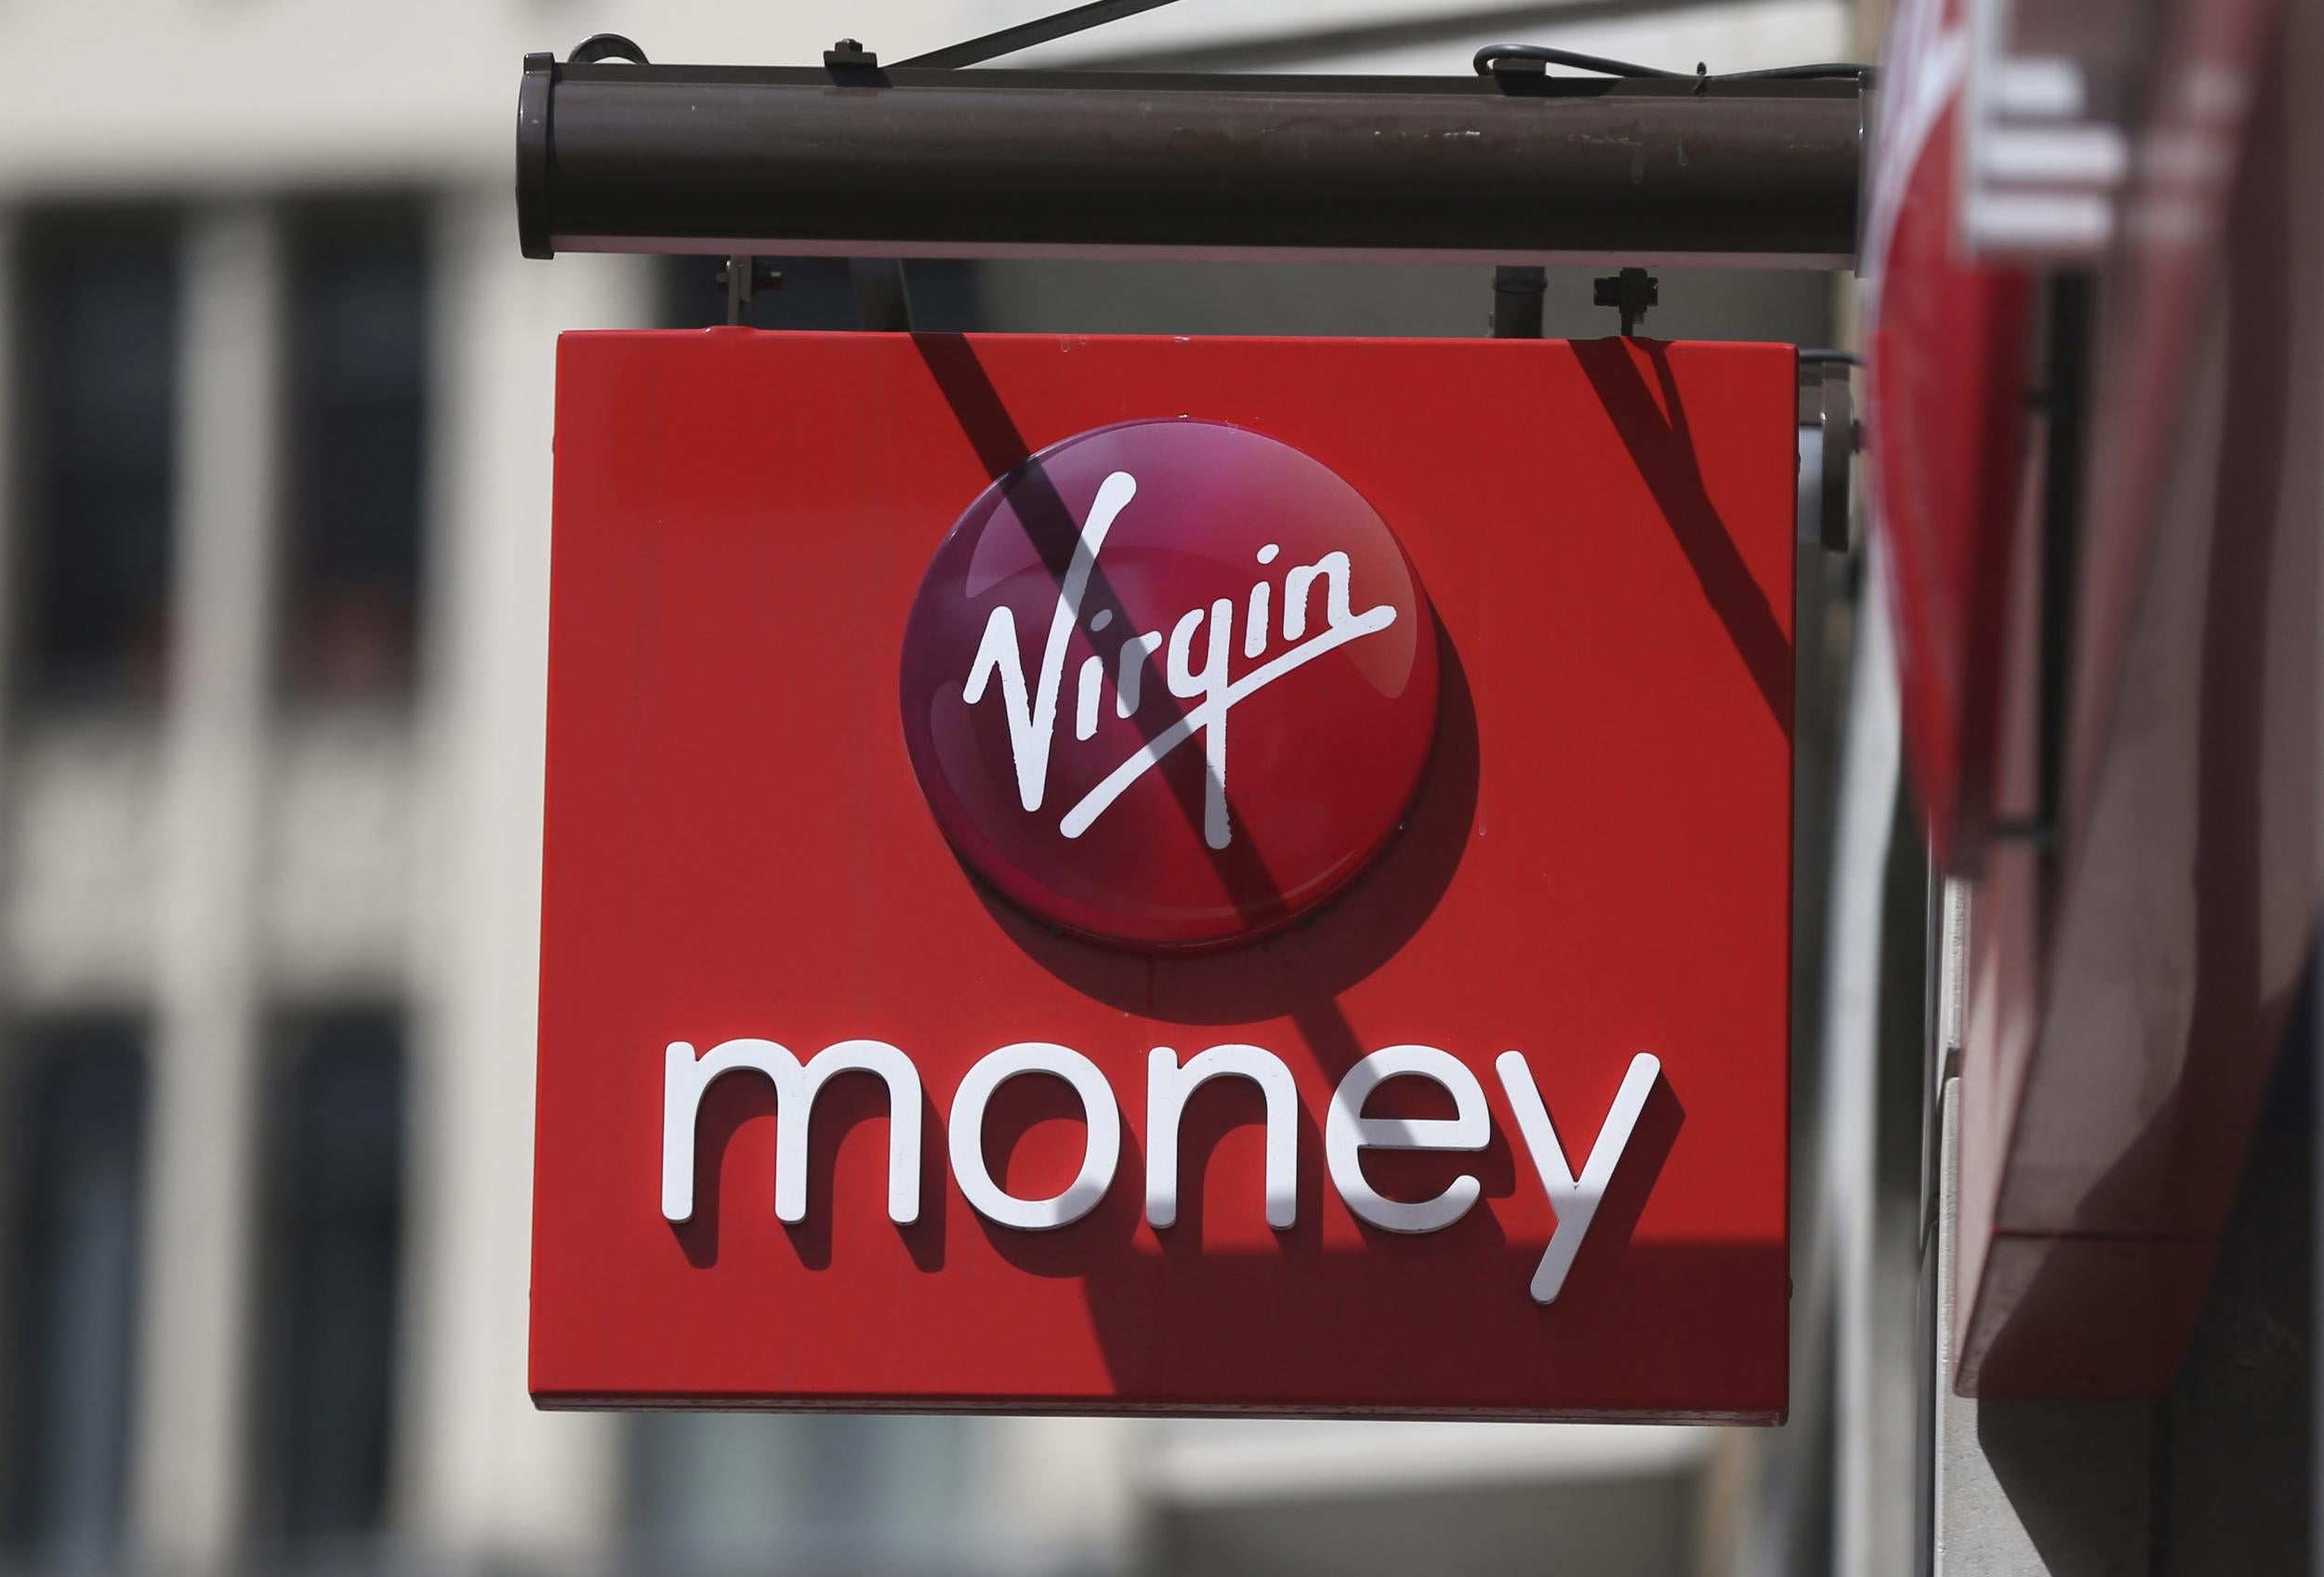 Shares in Virgin Money dropped in early trading on Monday